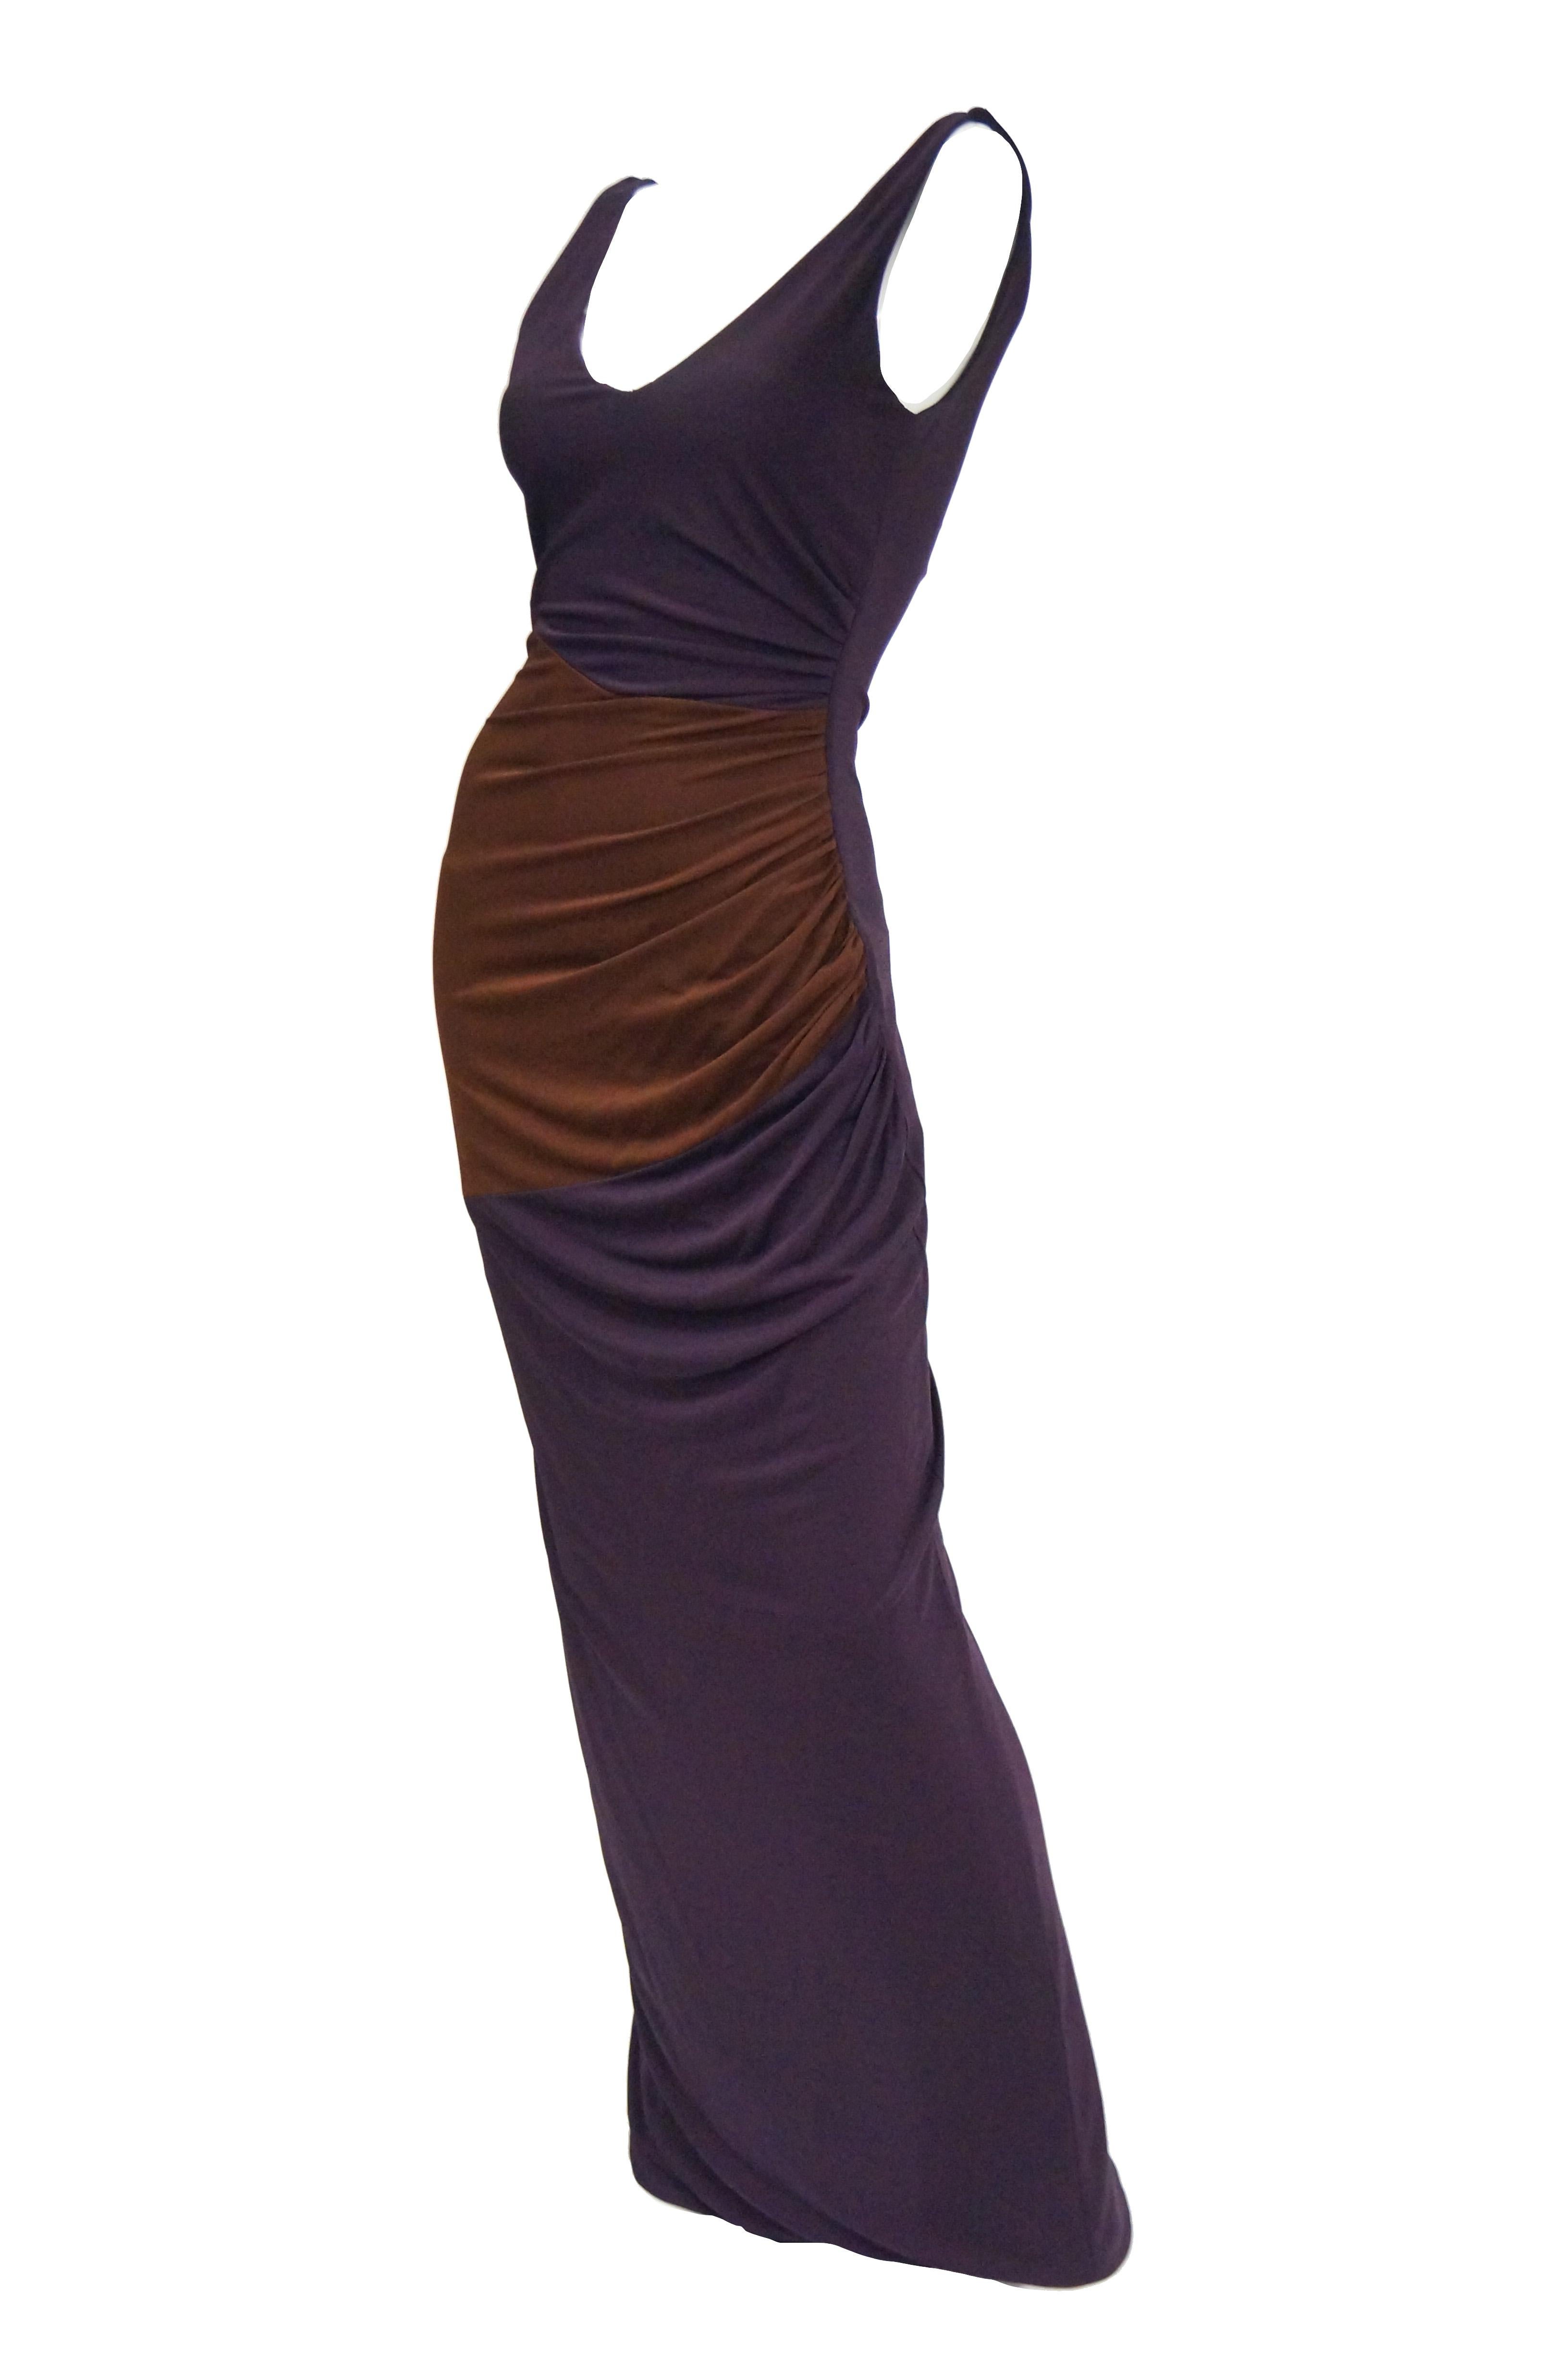 Women's 2007 Donald Deal Aubergine and Ginger Colorblock Drape Bodycon Evening Dress For Sale